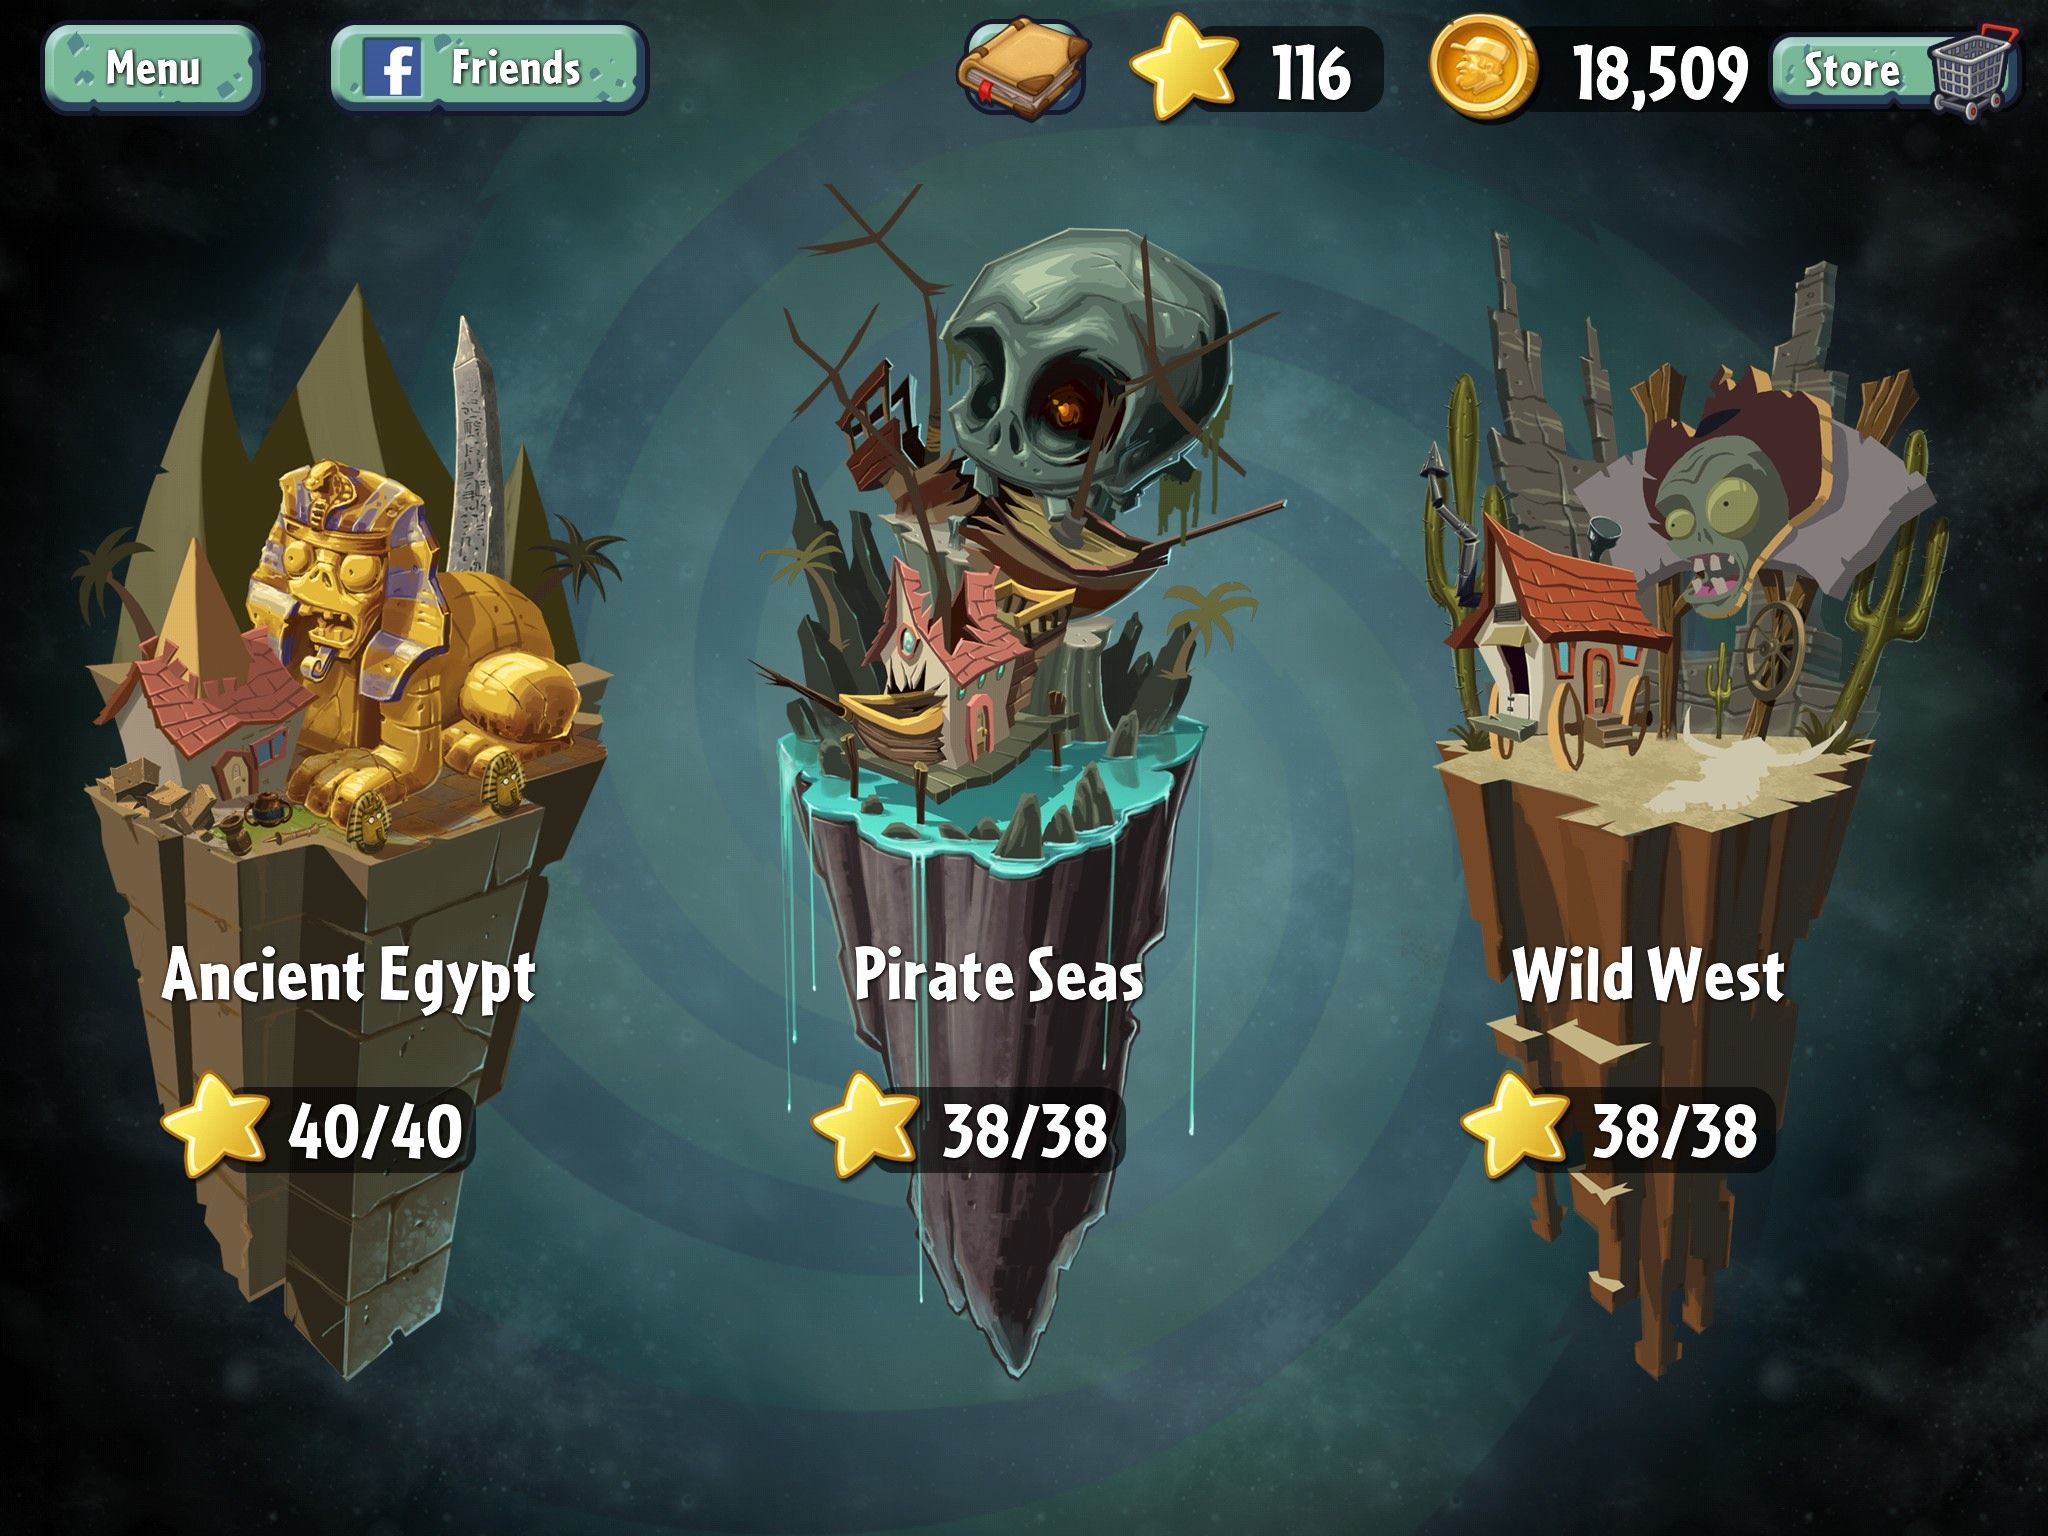 Plants vs. Zombies 2 review: it's about in-app payments ruining sequels